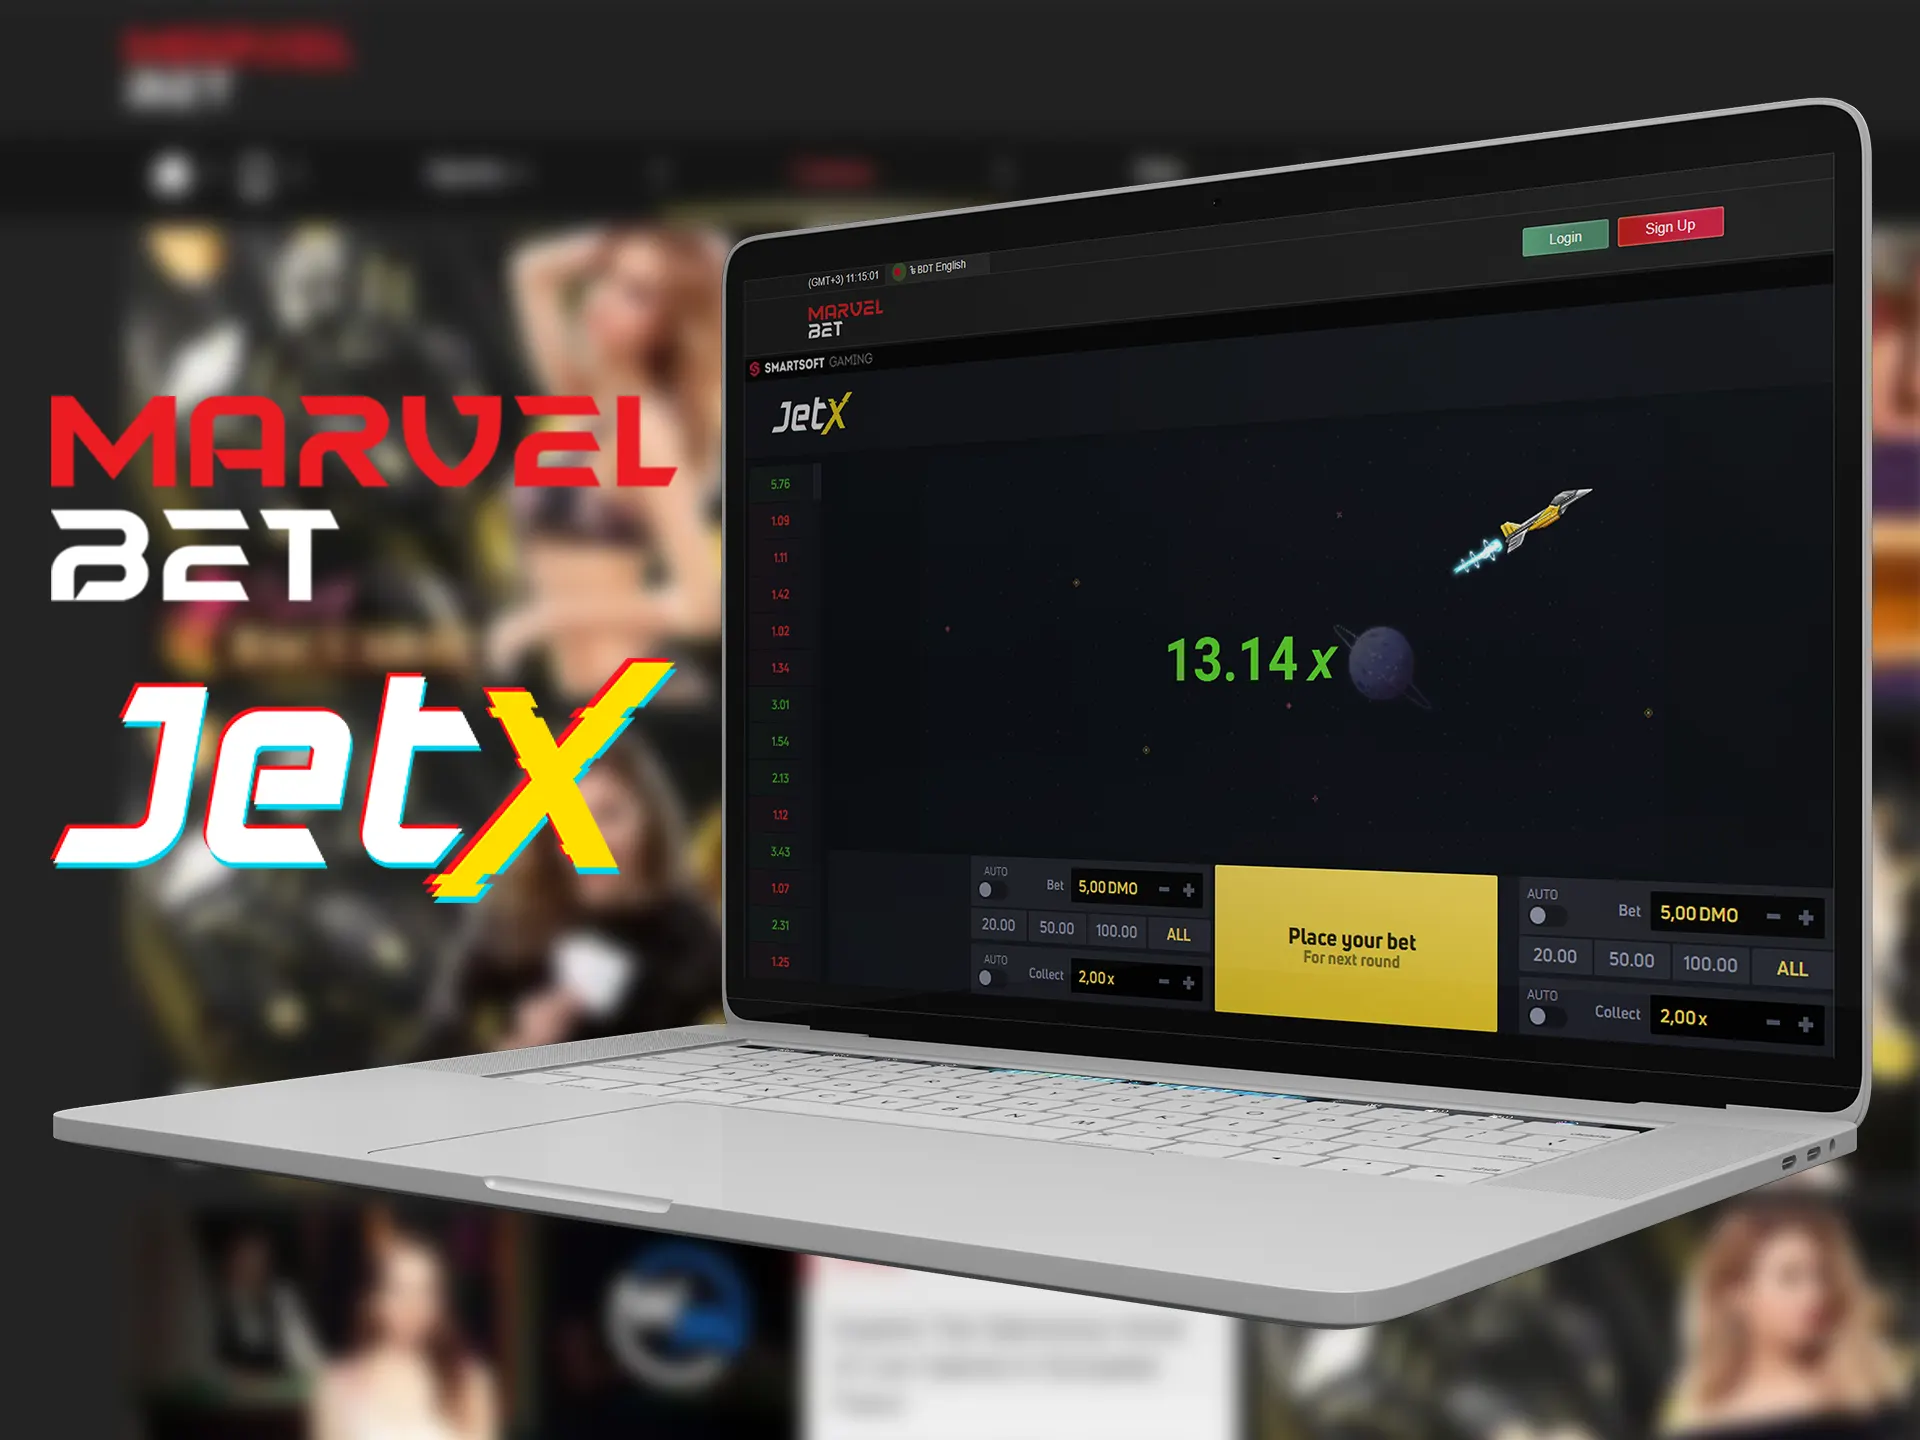 Try Marvelbet casino for winning money in the JetX game.